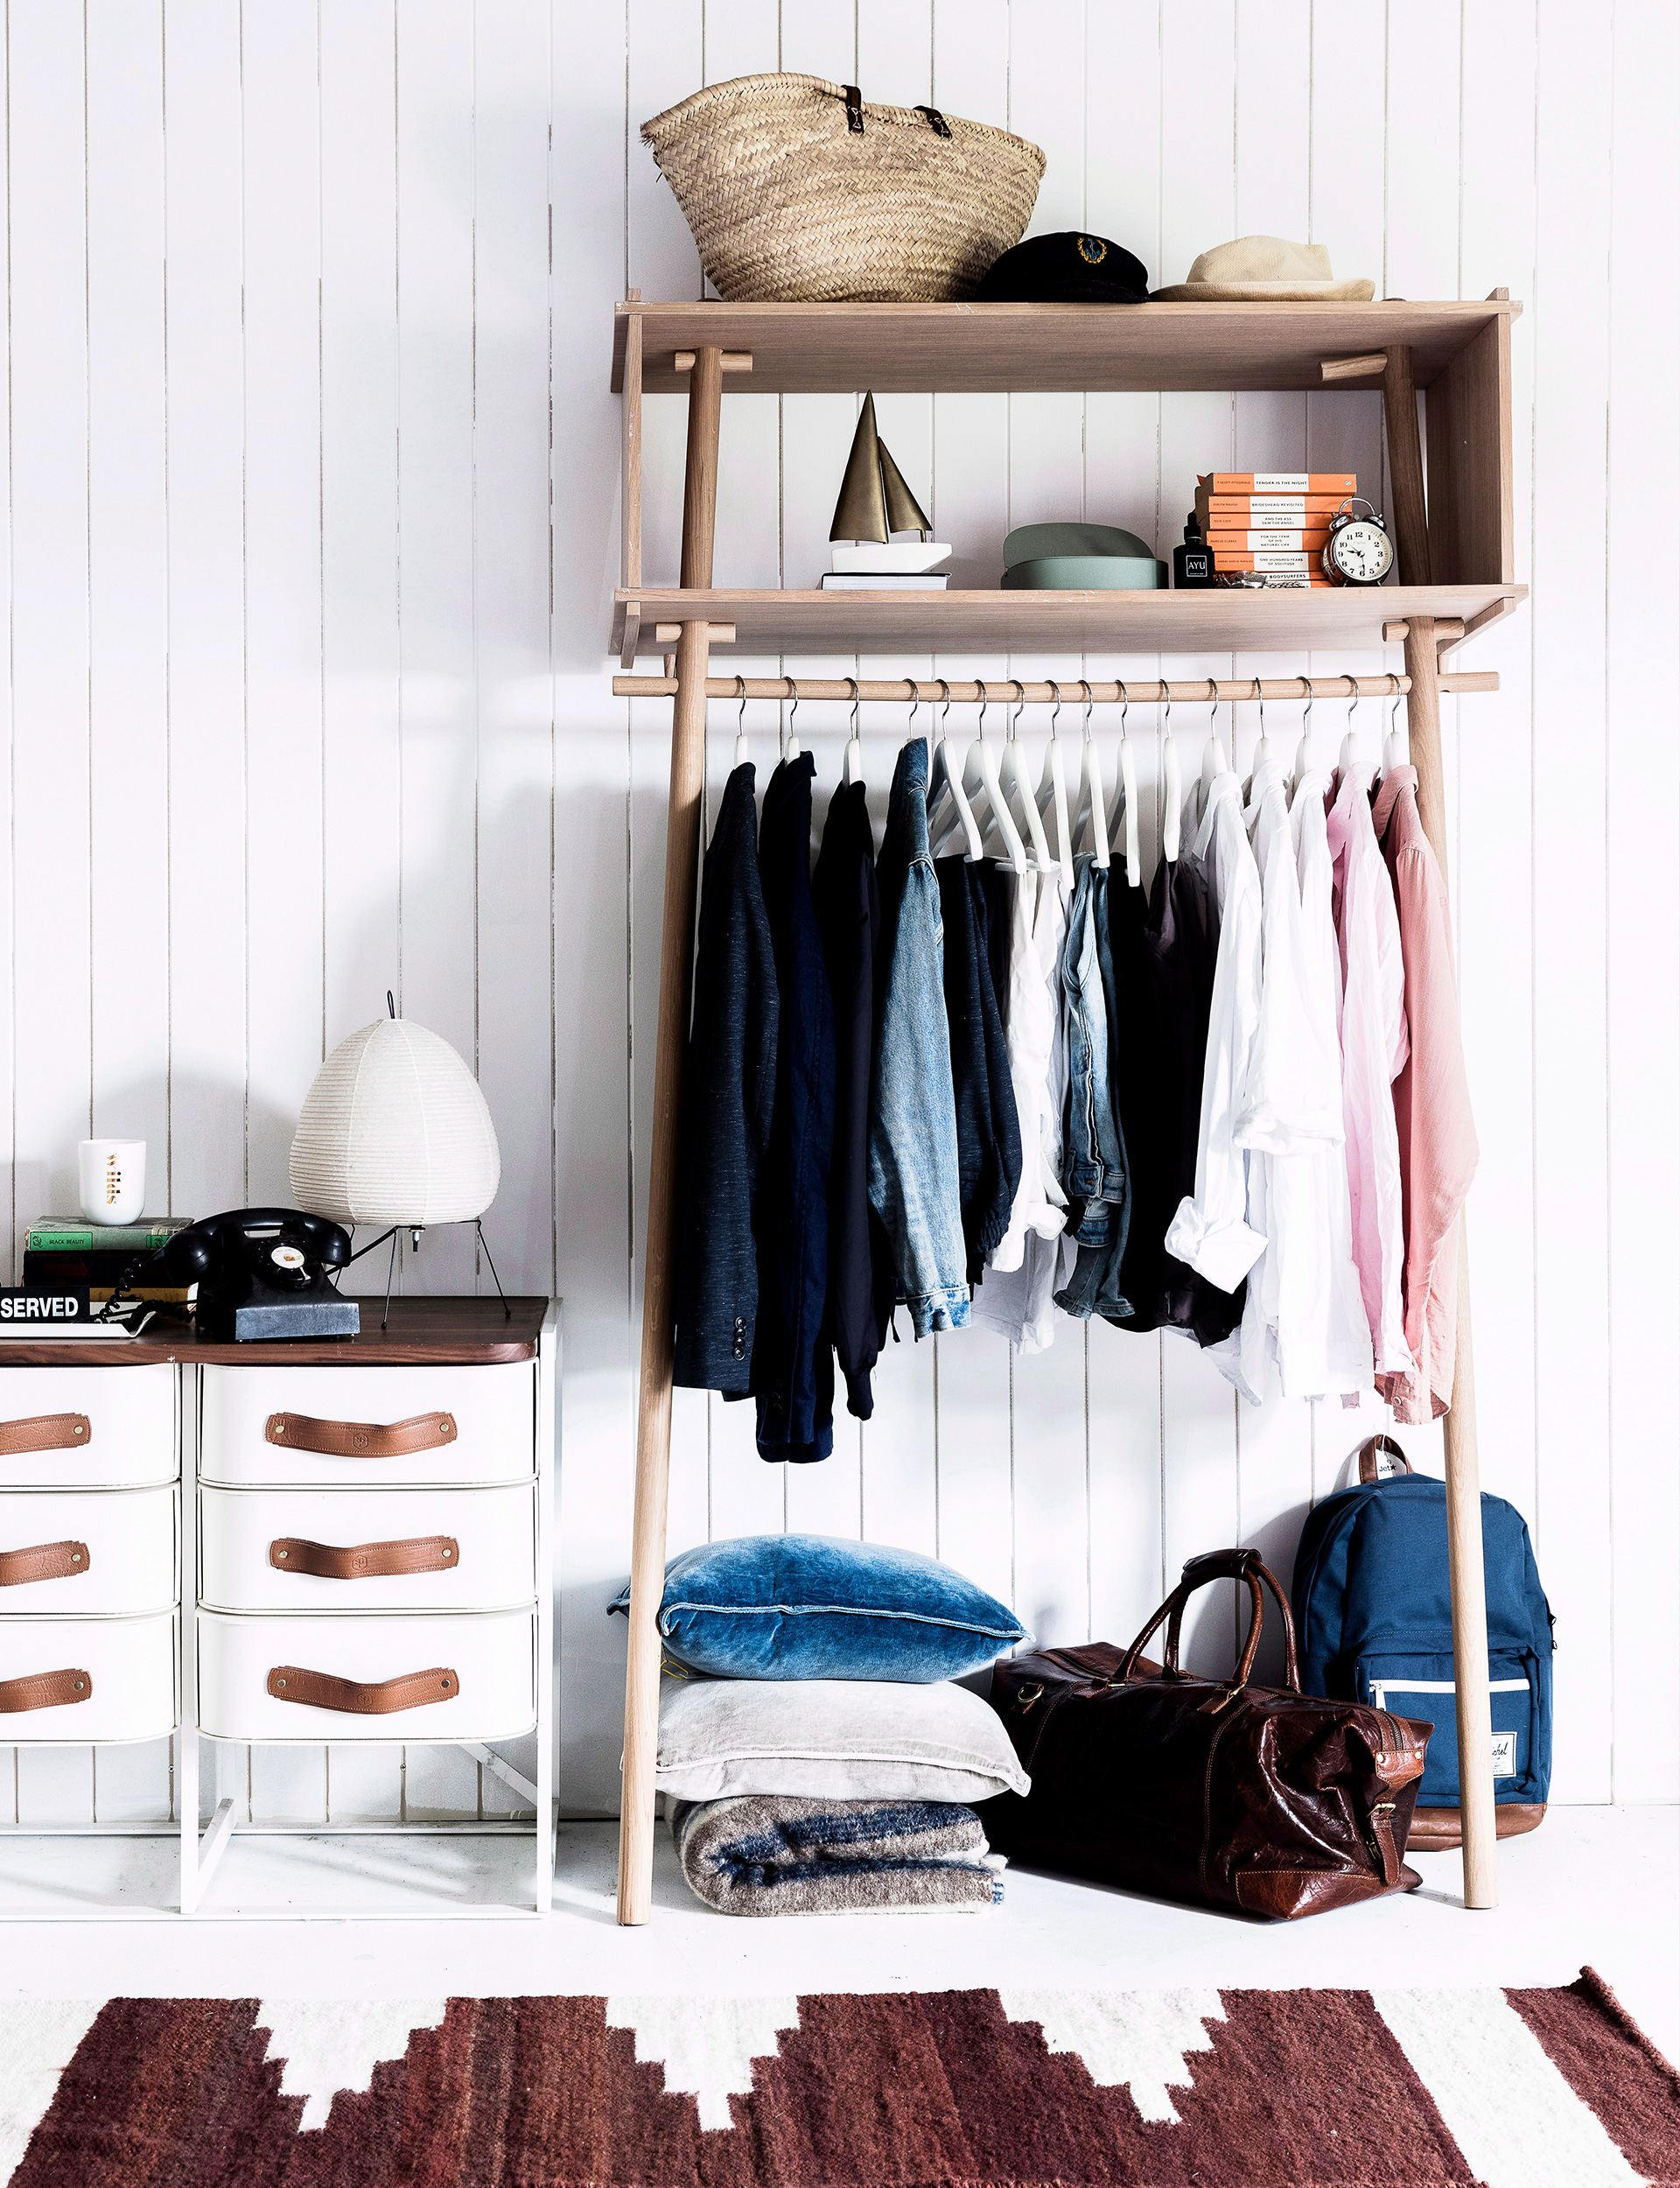 Find out what wardrobe is right for you